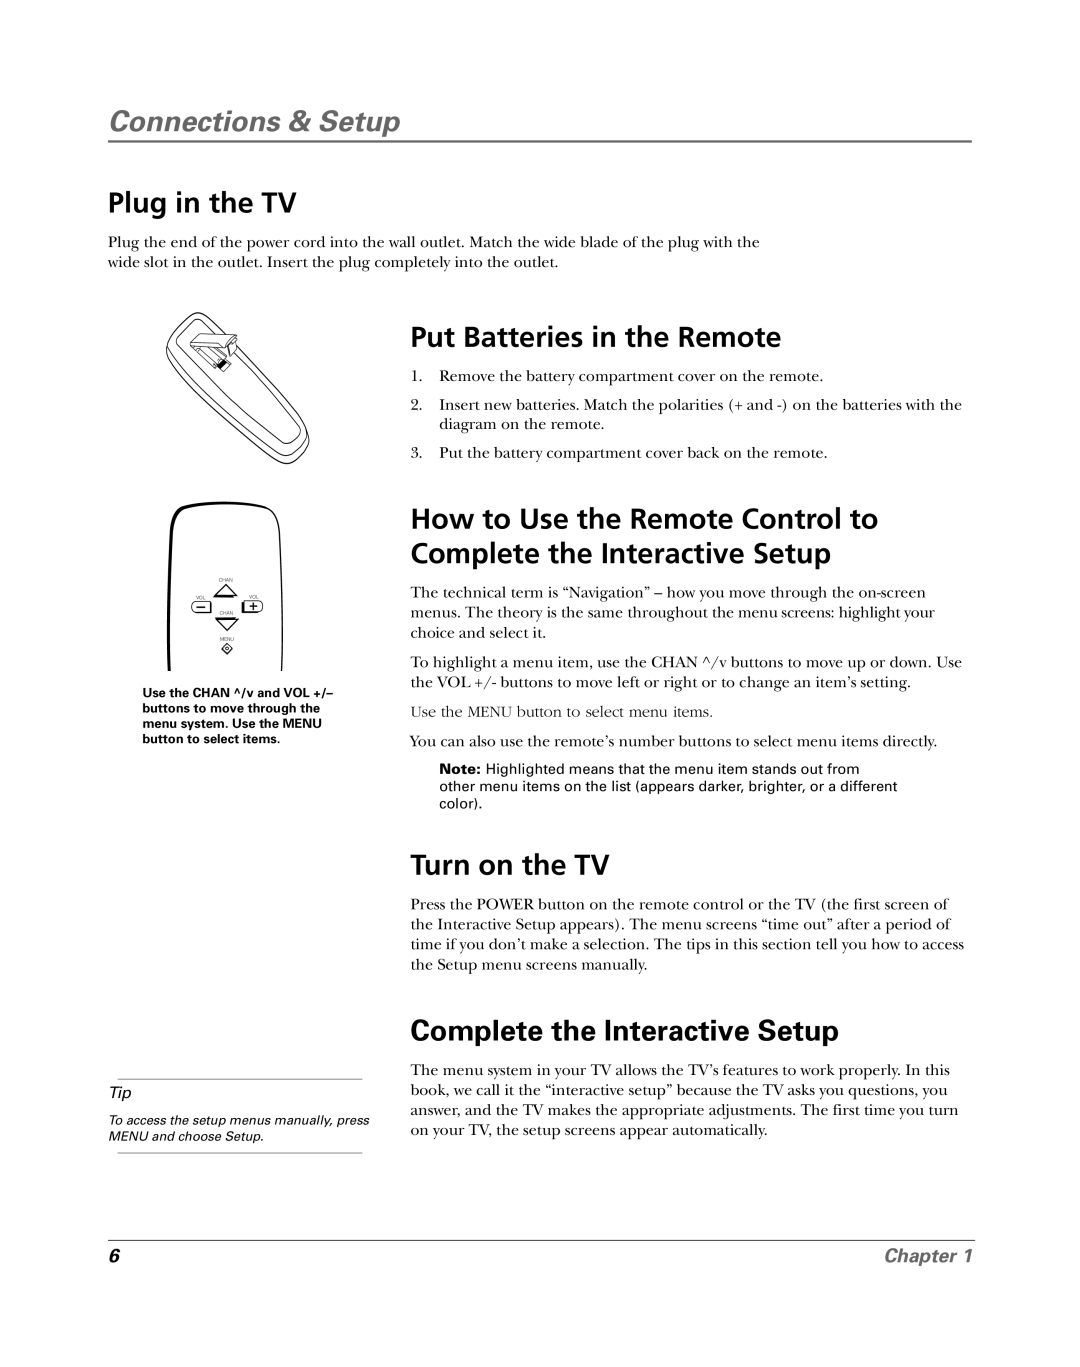 RCA 15956220 Plug in the TV, Put Batteries in the Remote, How to Use the Remote Control to Complete the Interactive Setup 